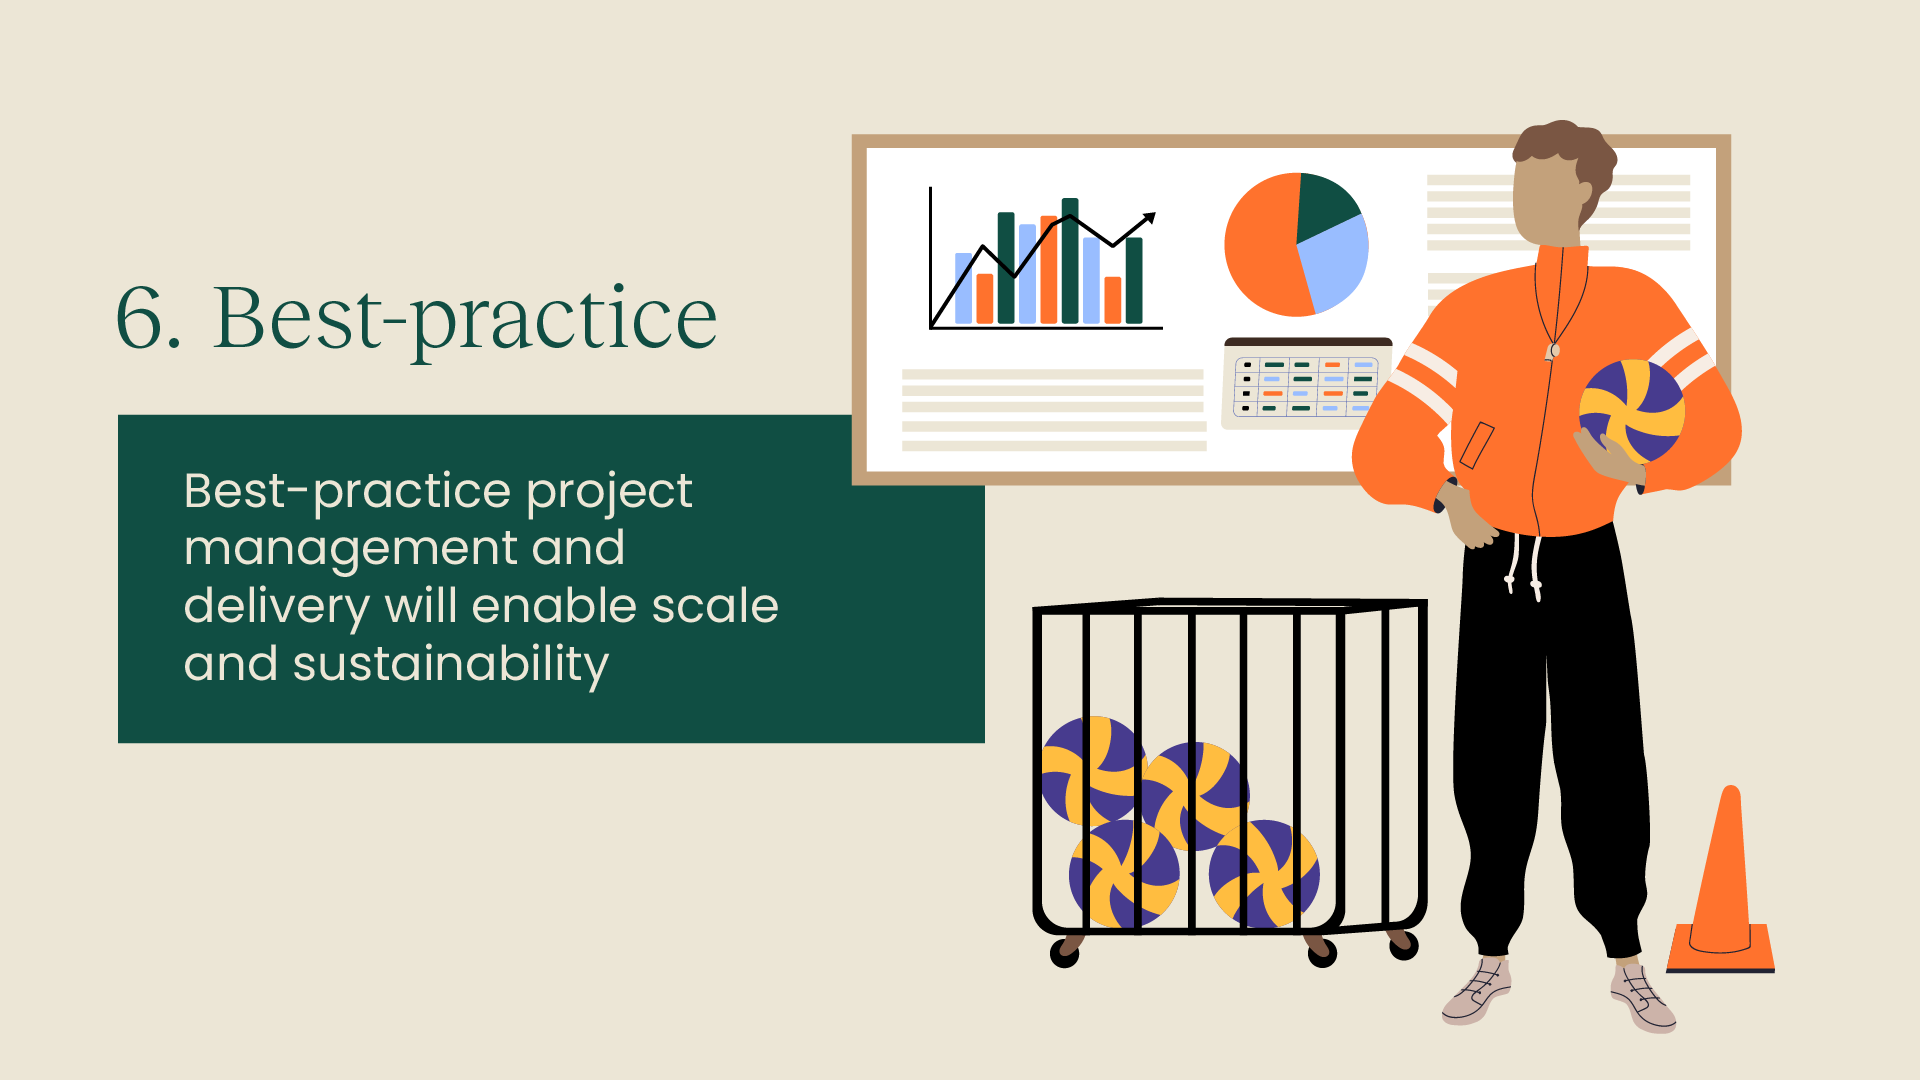 6. Best-practice: Best-practice project management and delivery will enable scale and sustainability